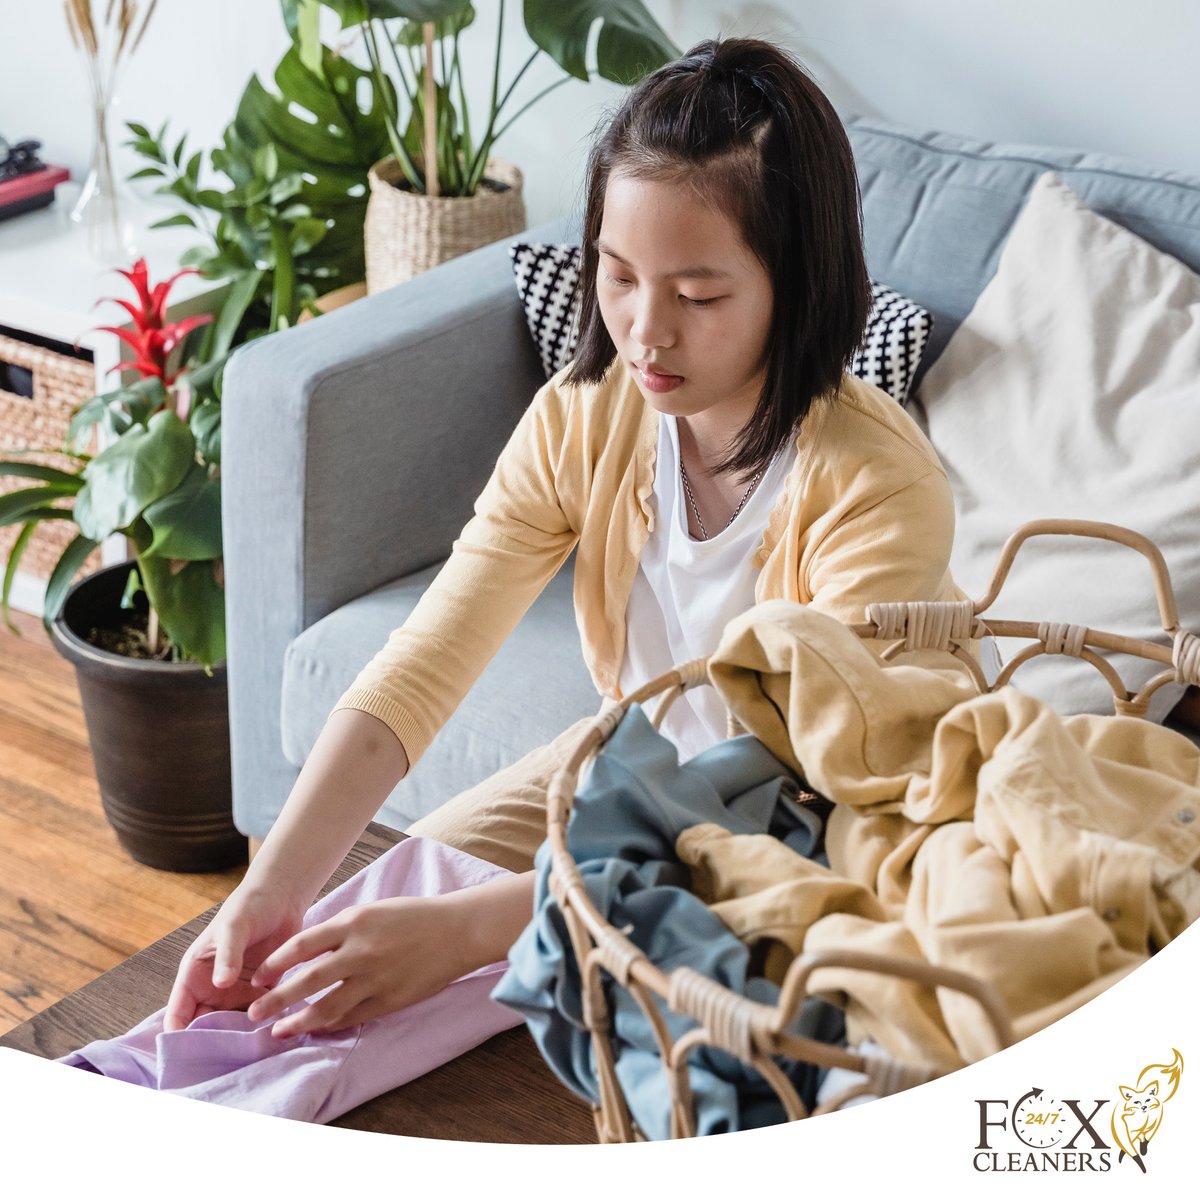 Is it laundry day? Not with Fox Cleaners! We take care of all your laundering needs, with professionalism and quality care. Say goodbye to #laundryday! 🧺 #Laundry #WeGotYourBack #Quality #ProfessionalDryCleaning #DryCleaners